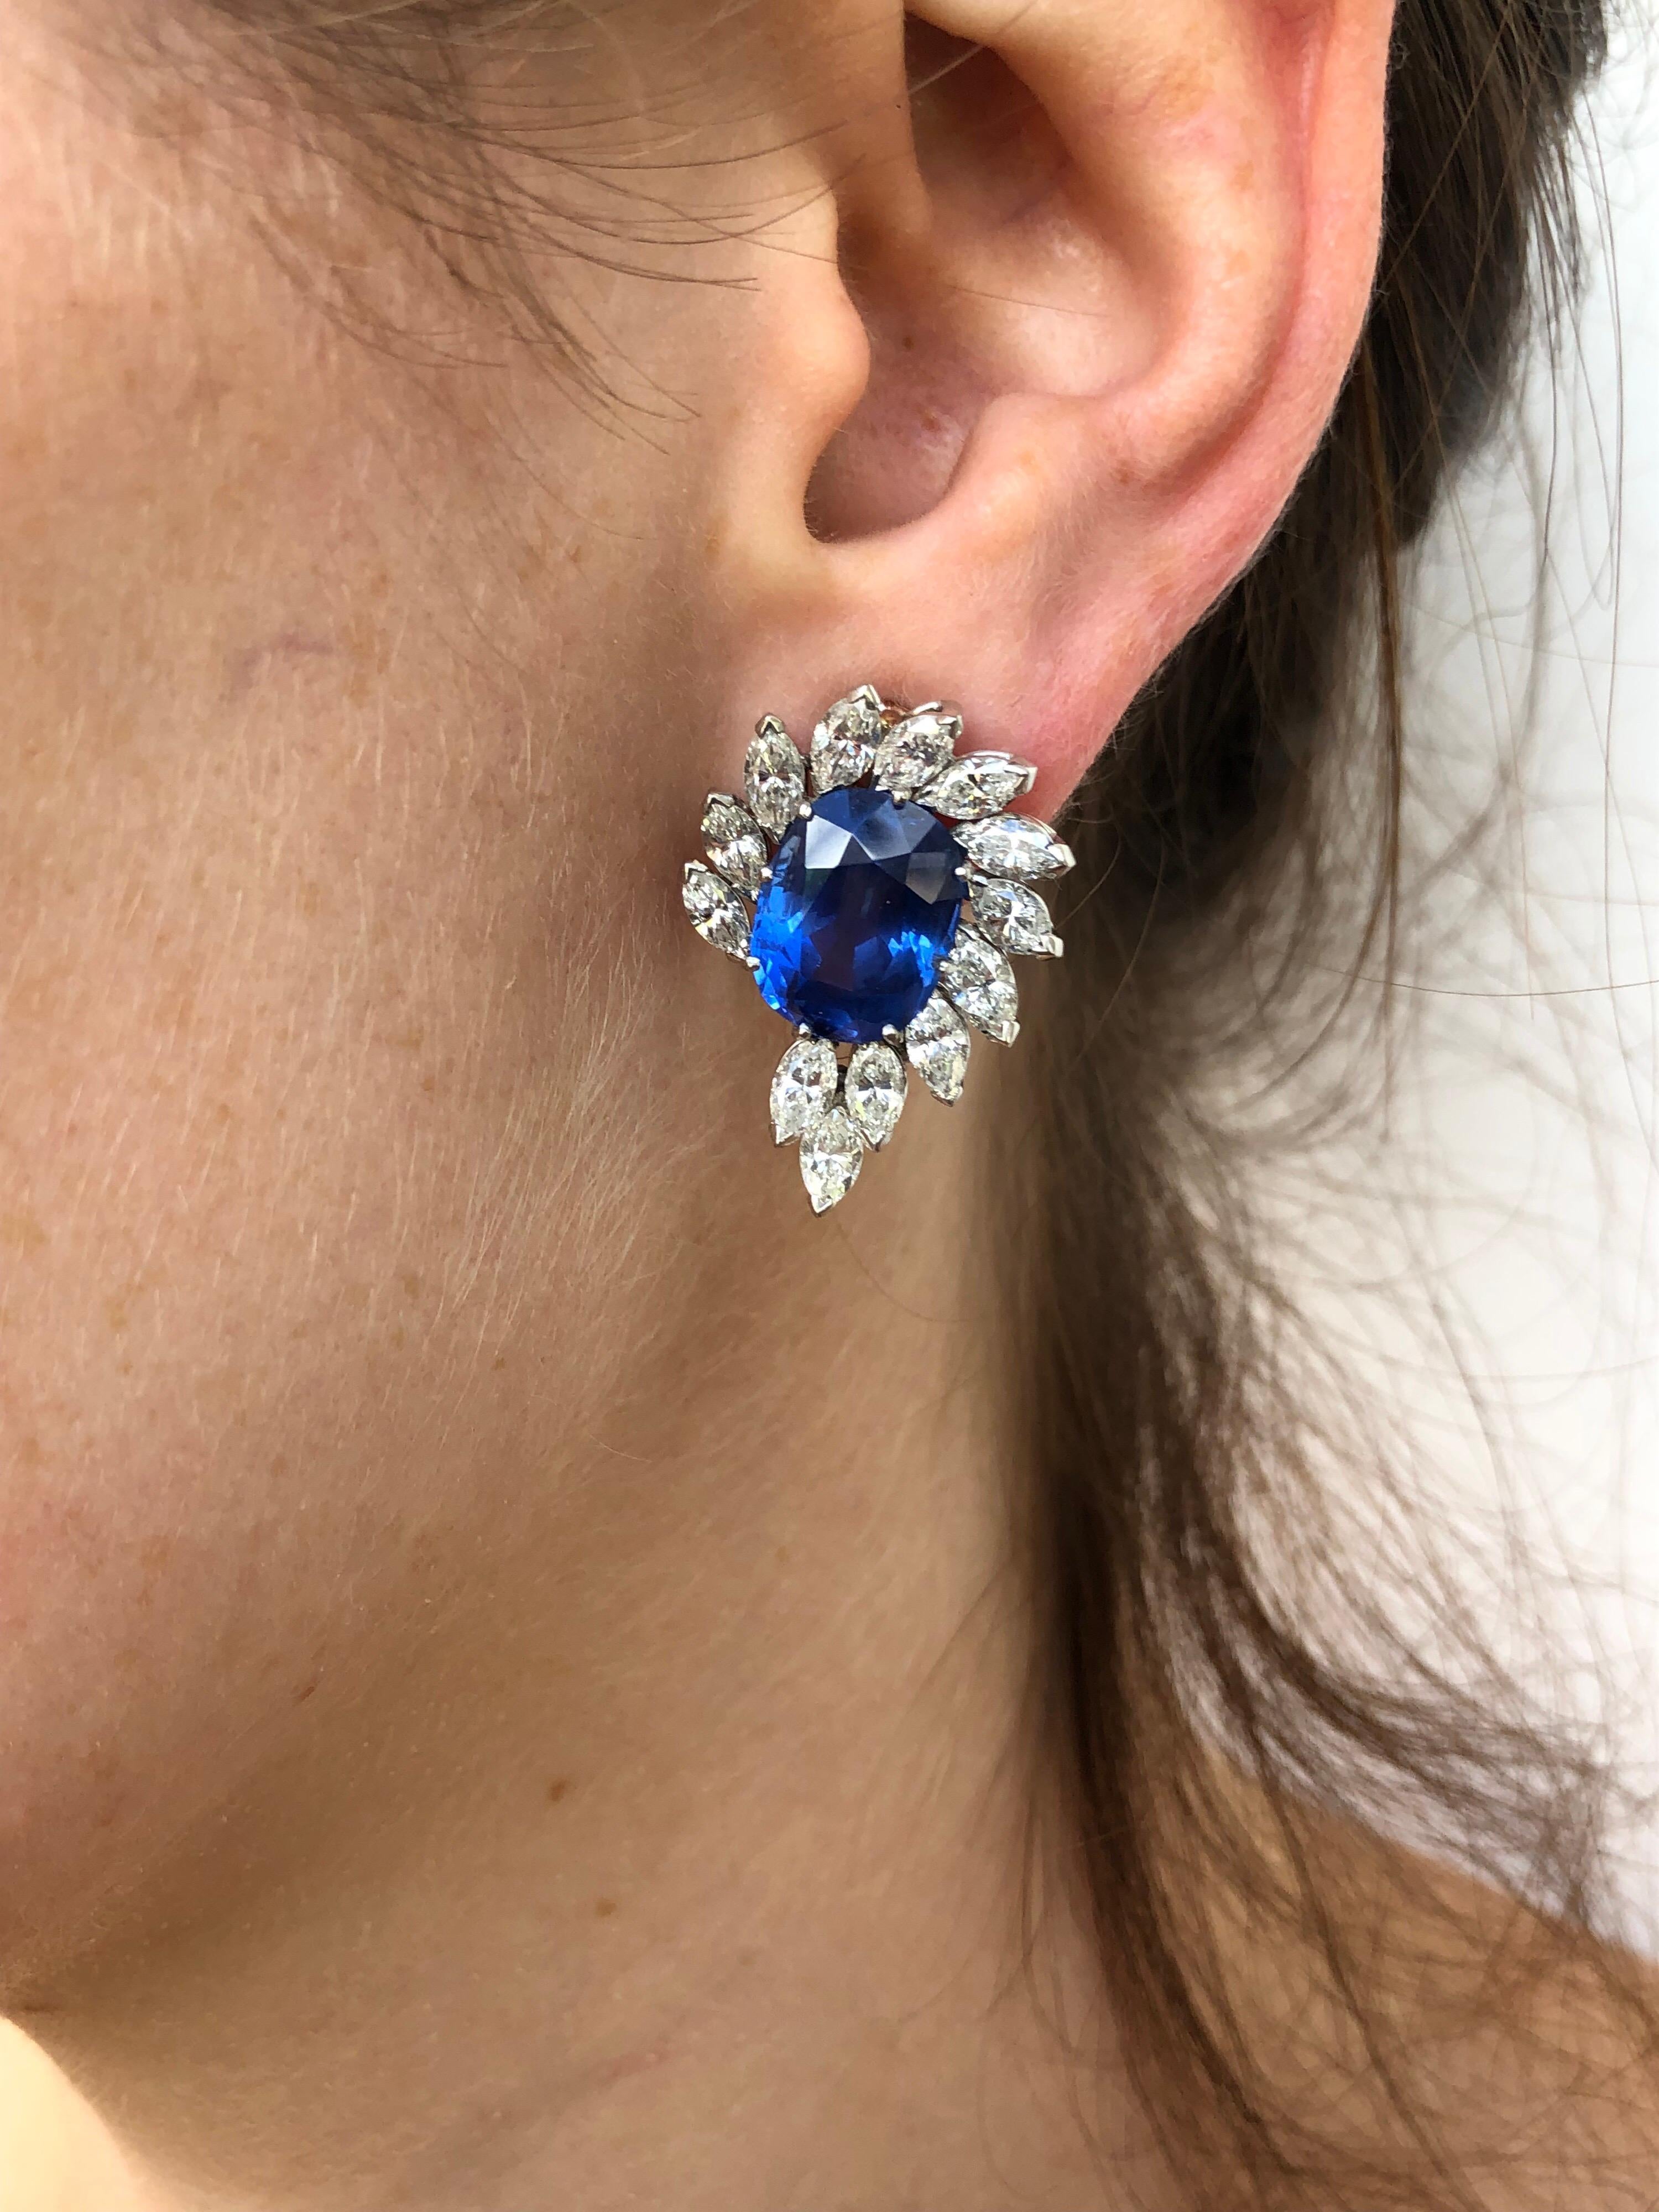 Pair of Sapphire and Diamond Earrings SSEF 14.92 Carat Untreated Sapphires For Sale 2